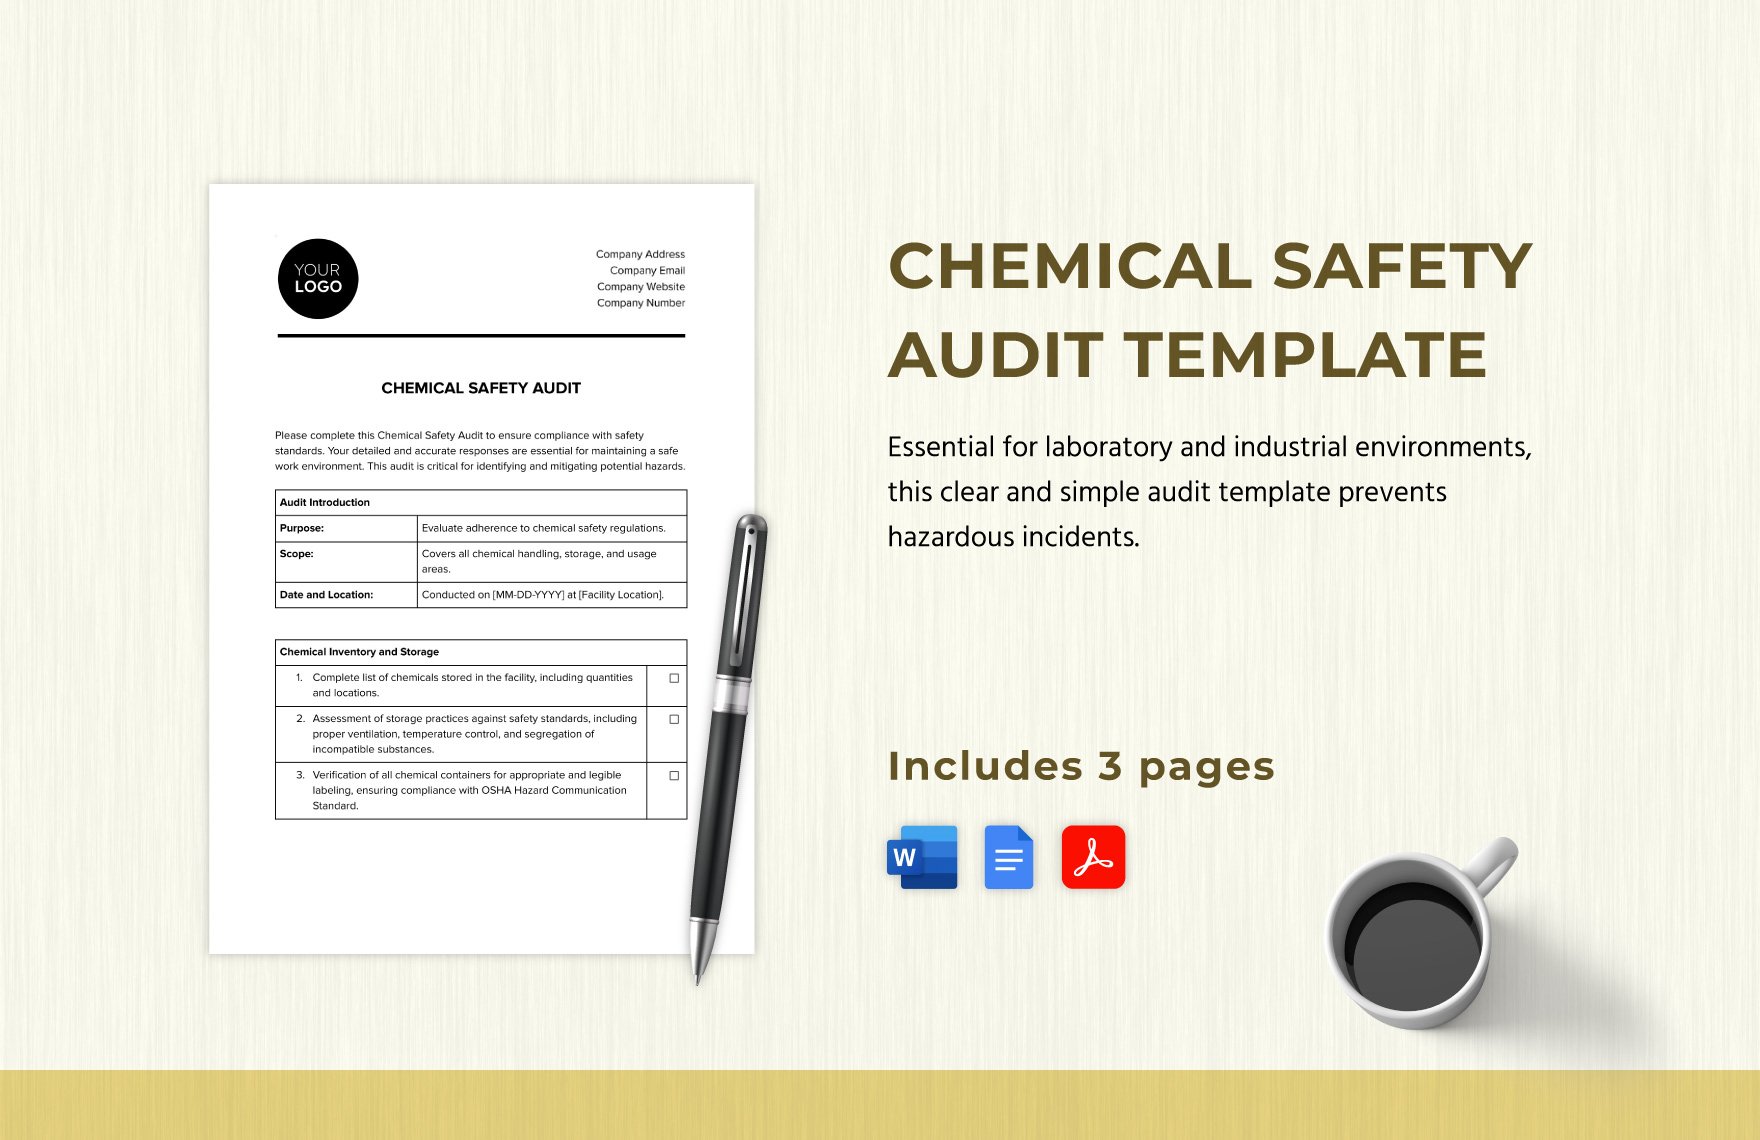 Chemical Safety Audit Template in Word, Google Docs, PDF